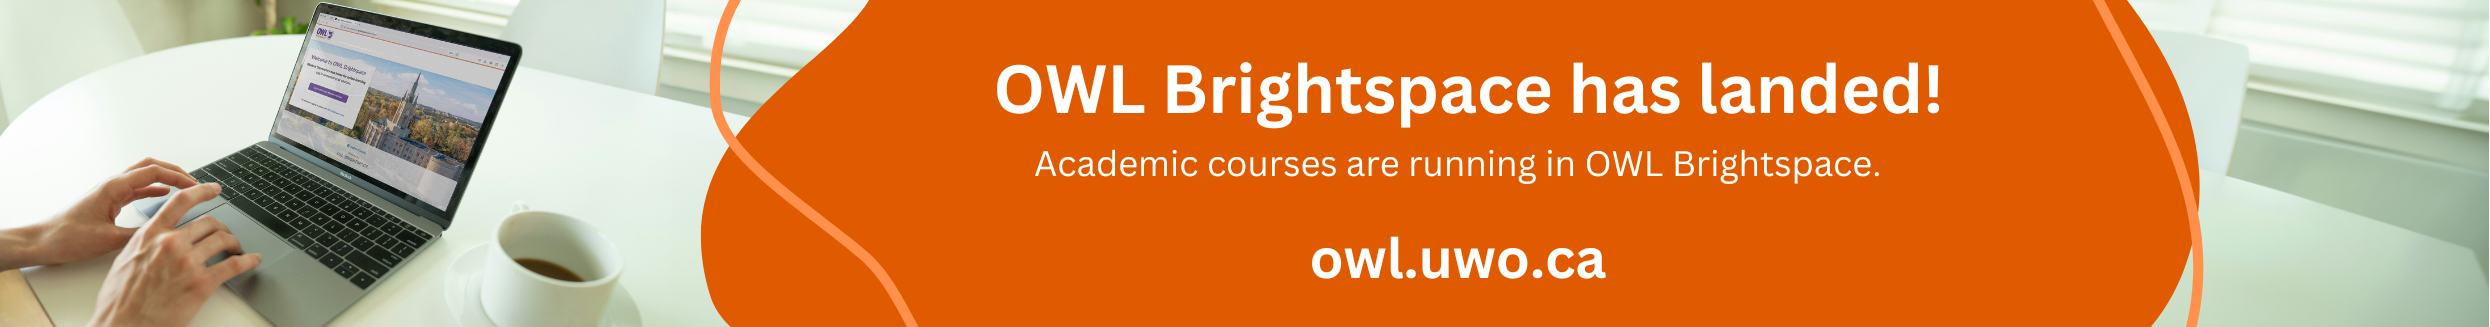 OWL Brightspace has landed! Summer academic courses are running in OWL Brightspace. Click to be directed to the new OWL launch page.